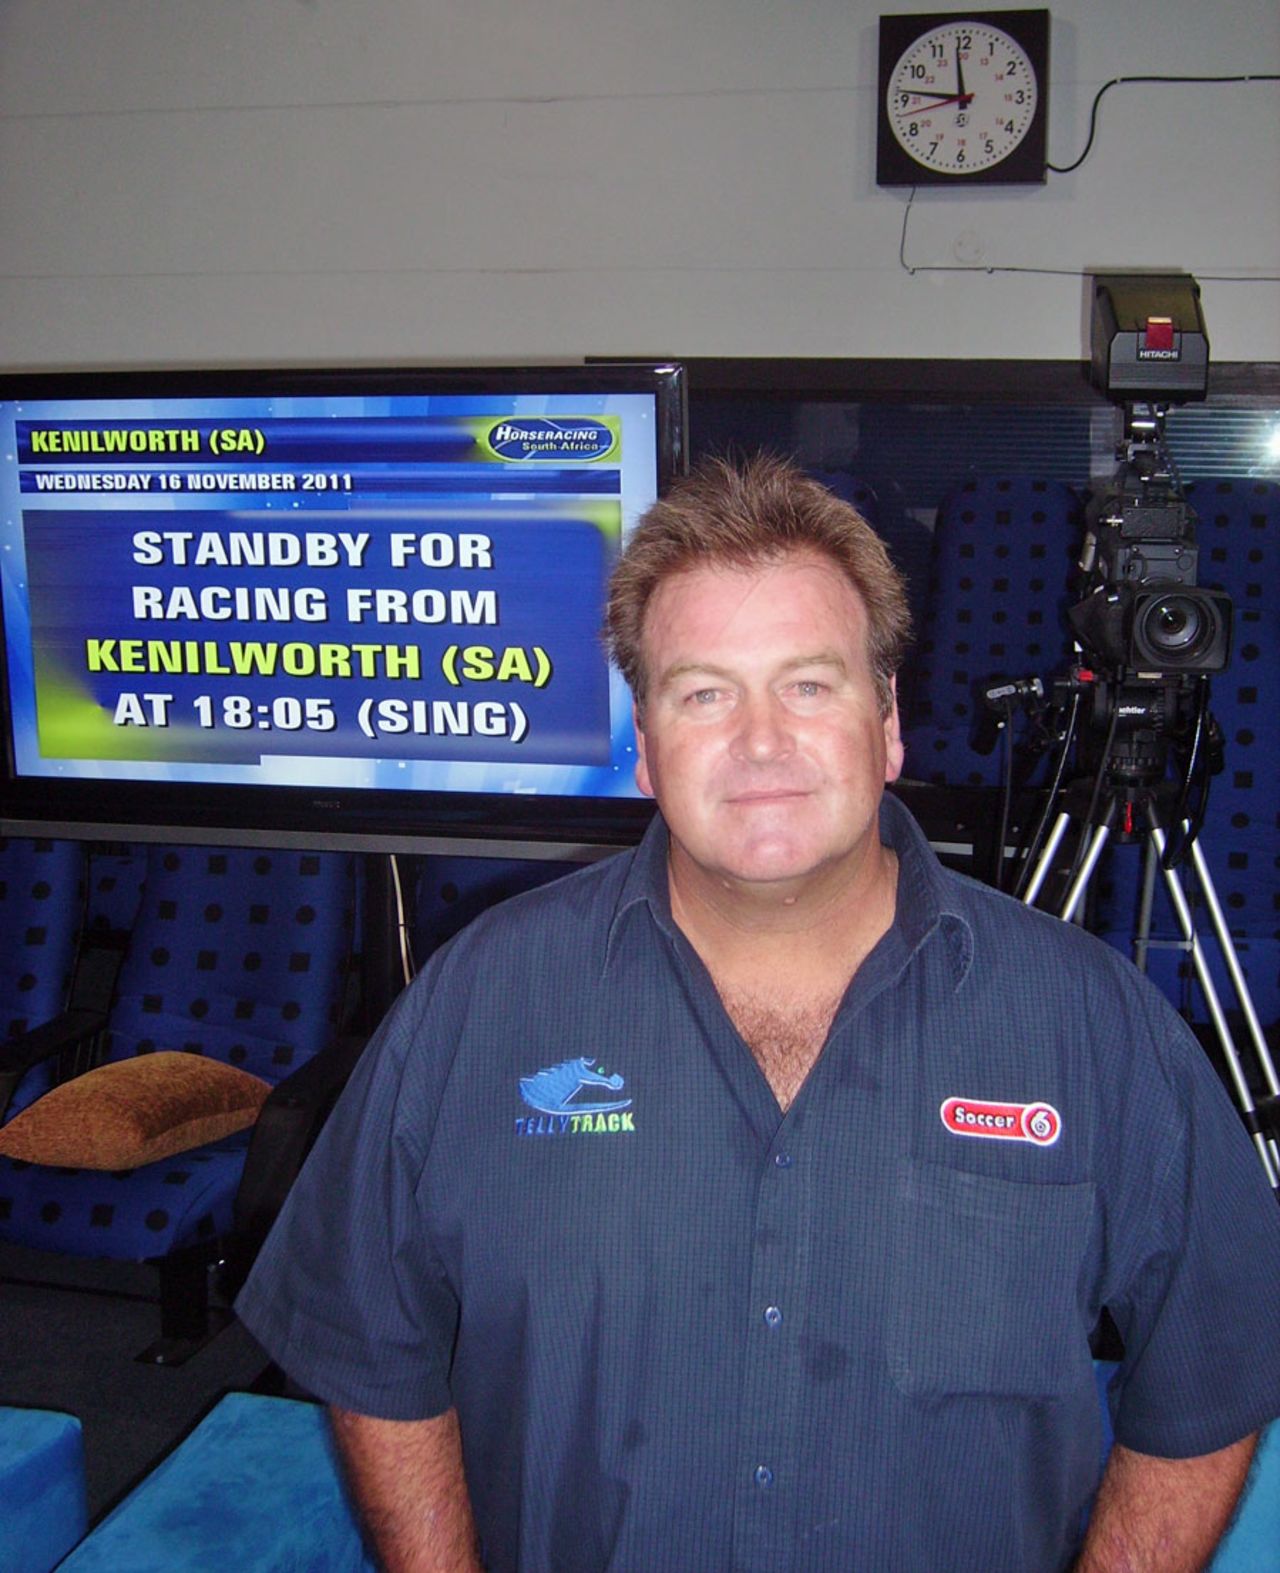 Australian fast bowler Rod McCurdy now works at a TV station in South Africa, 2011